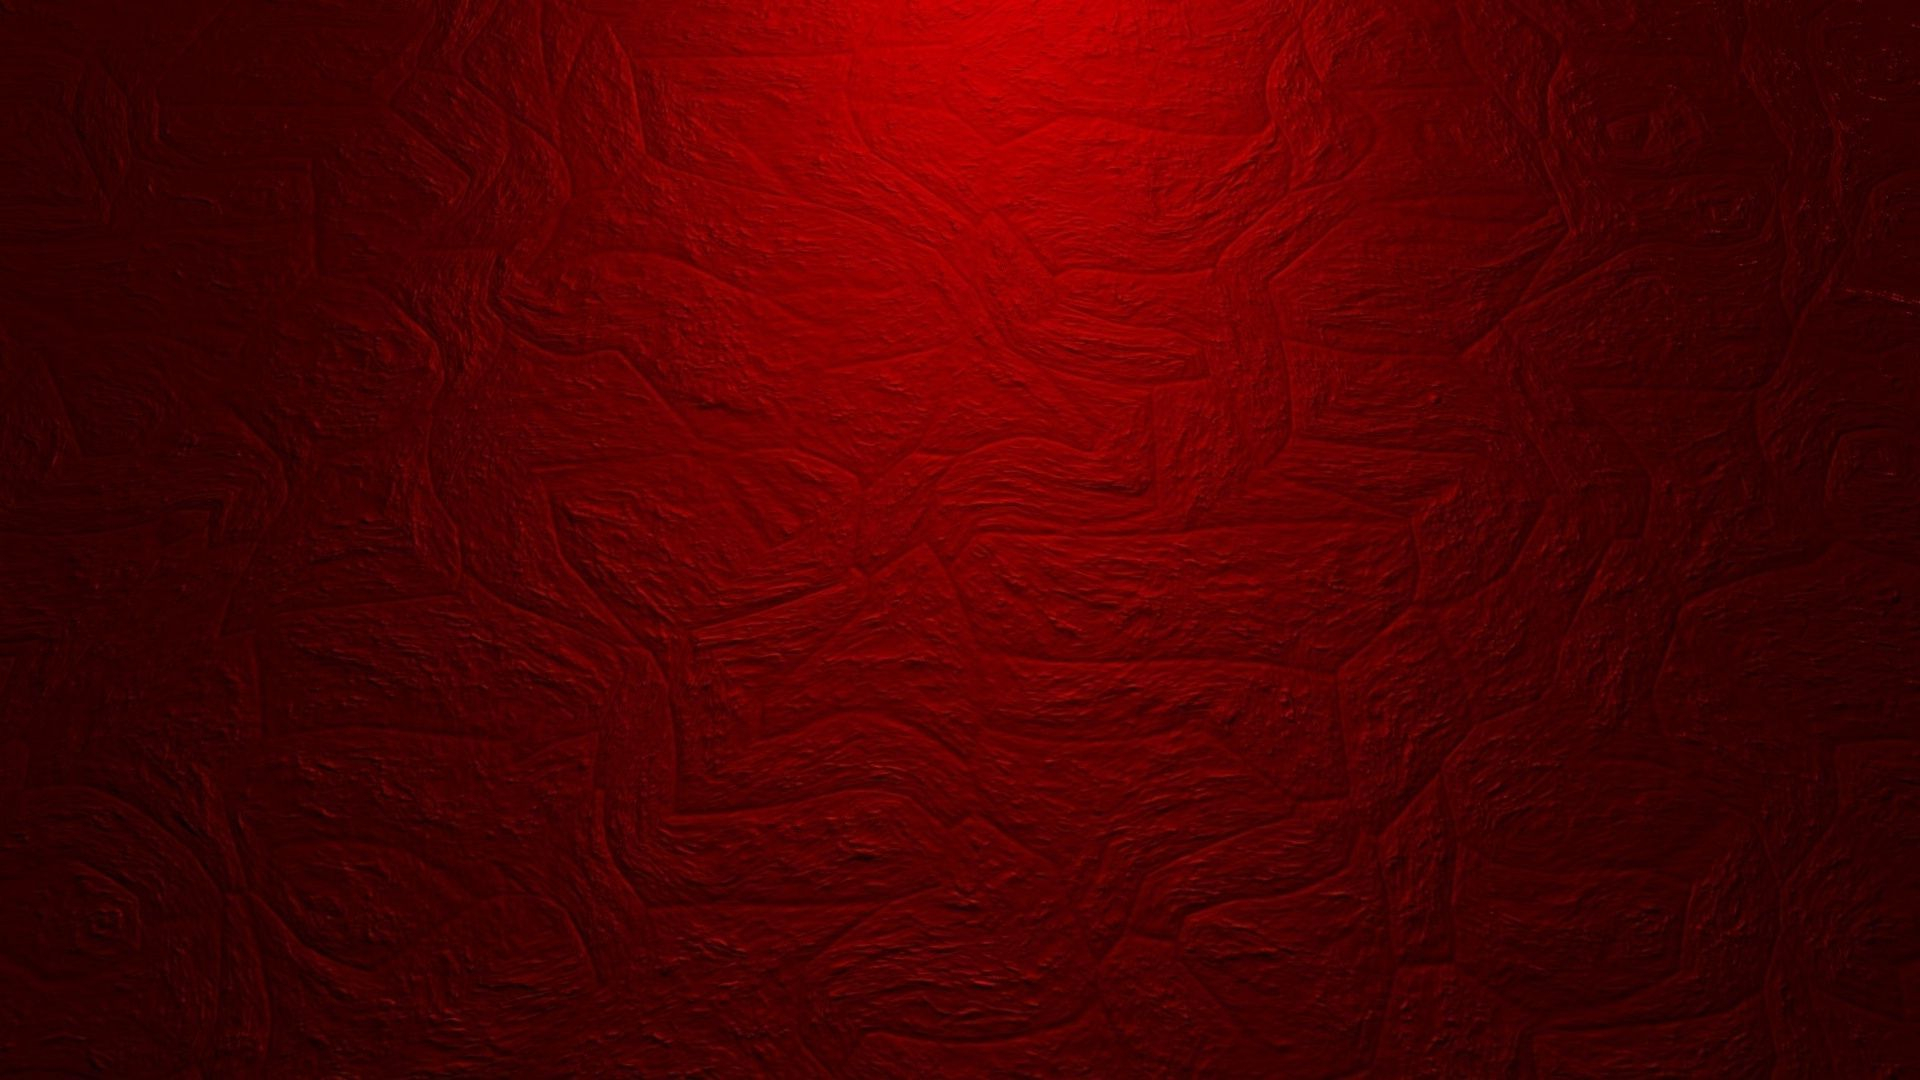 1920x1080 RED | Red wallpaper, Wallpaper pictures, Iphone wallpaper vintage